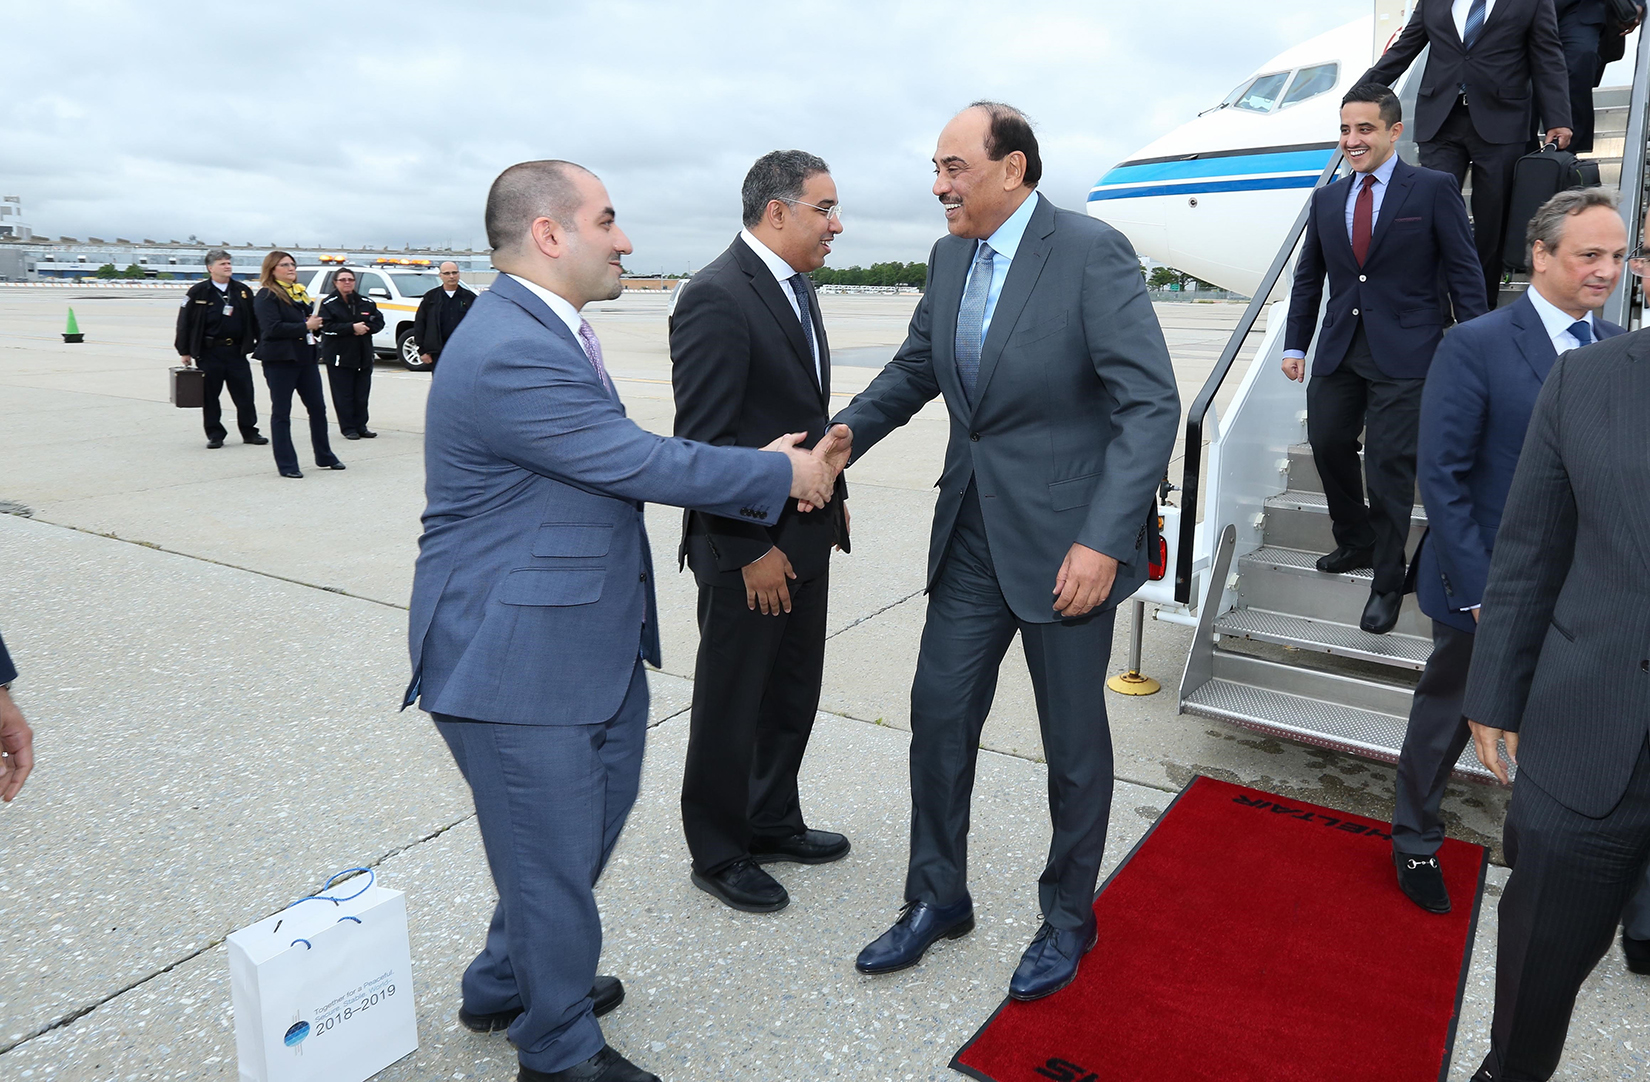 Foreign Minister Sheikh Sabah Khaled Al-Hamad Al-Sabah arrives in New York to take part in the UN's General Assembly session